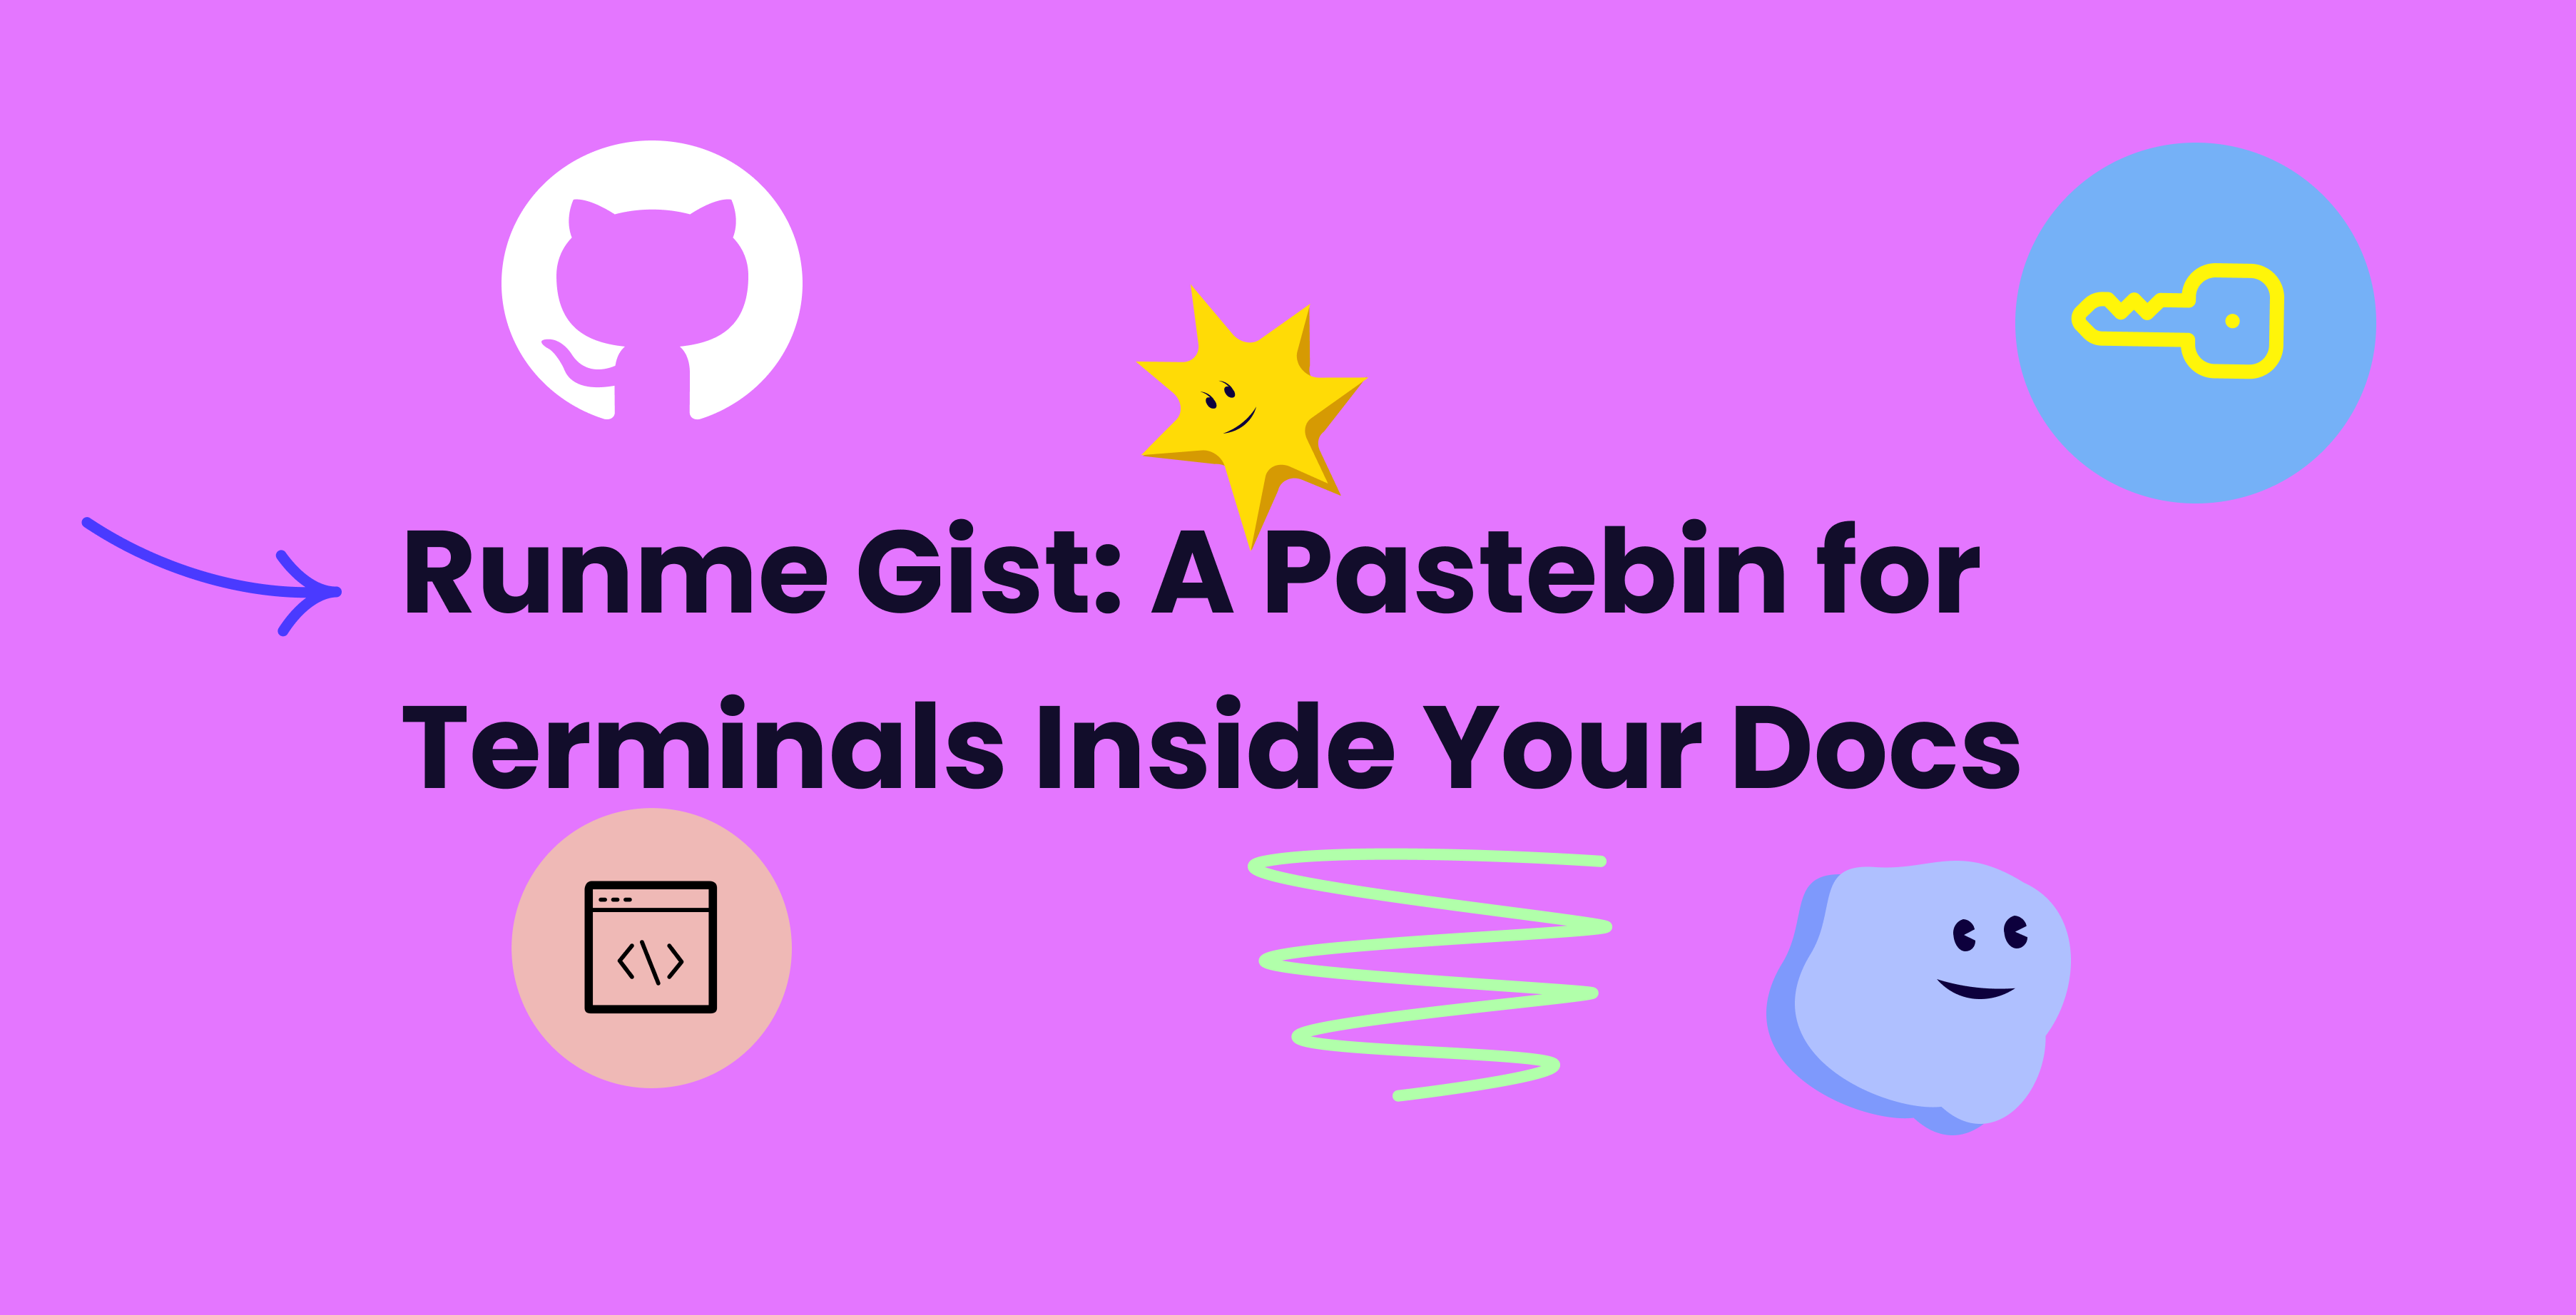 Runme Gist: A Pastebin for Terminals Inside Your Docs